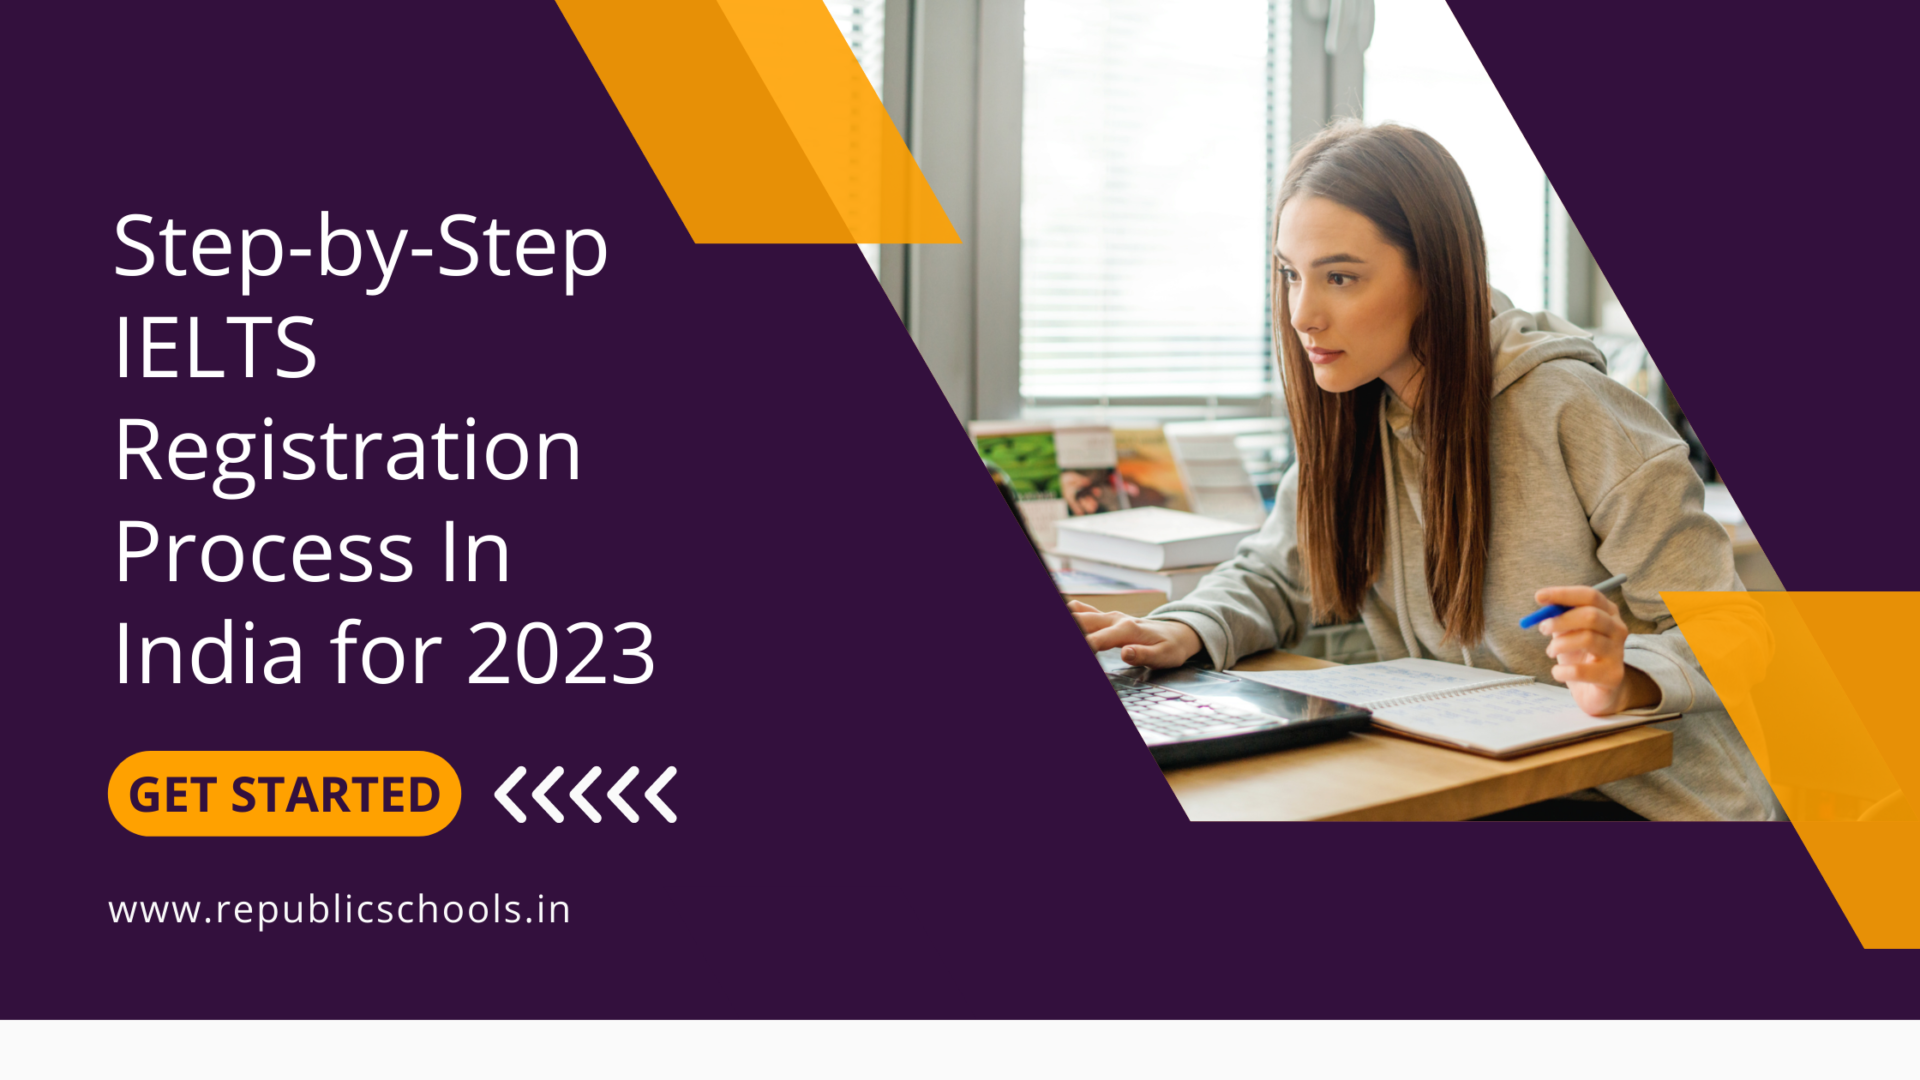 Step-by-Step IELTS Registration Process In India for 2023